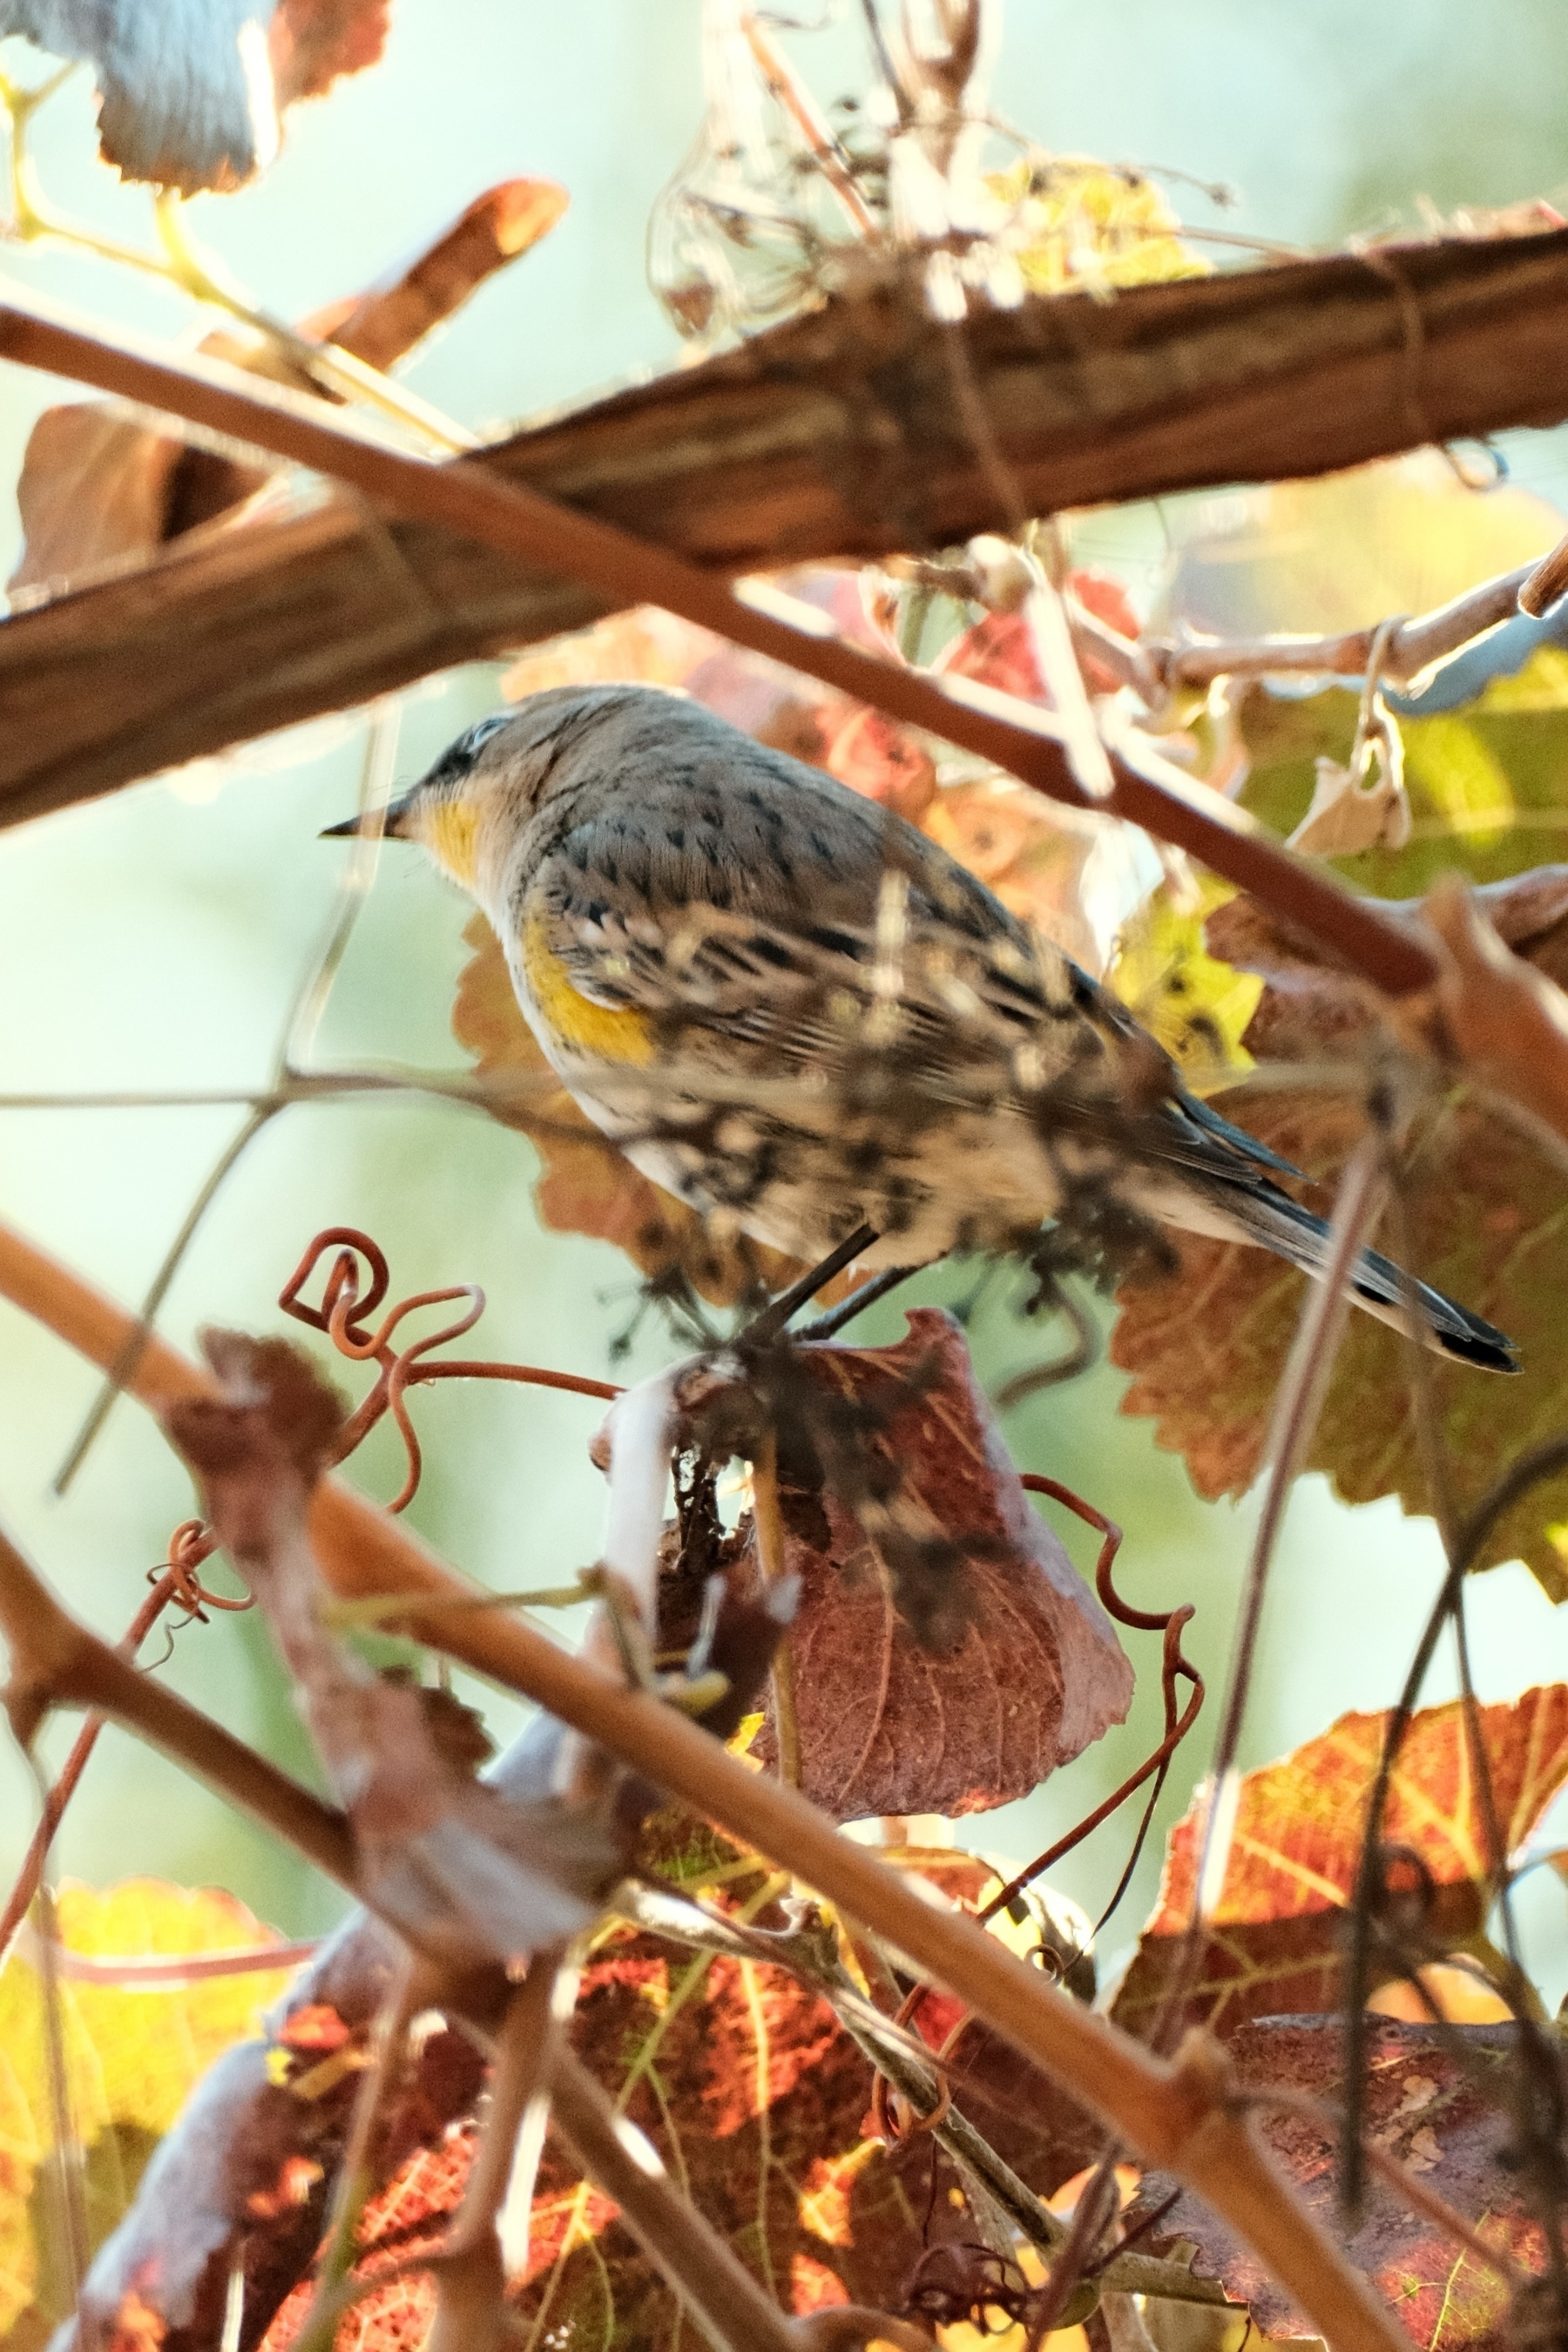 A Yellow-Rumped Warbler in a grape vine that’s losing its red to brown leaves. The pointy beaked warbler has a yellow neck and chest. It’s gray and white elsewhere. The bird is staring at something off-frame to the left.